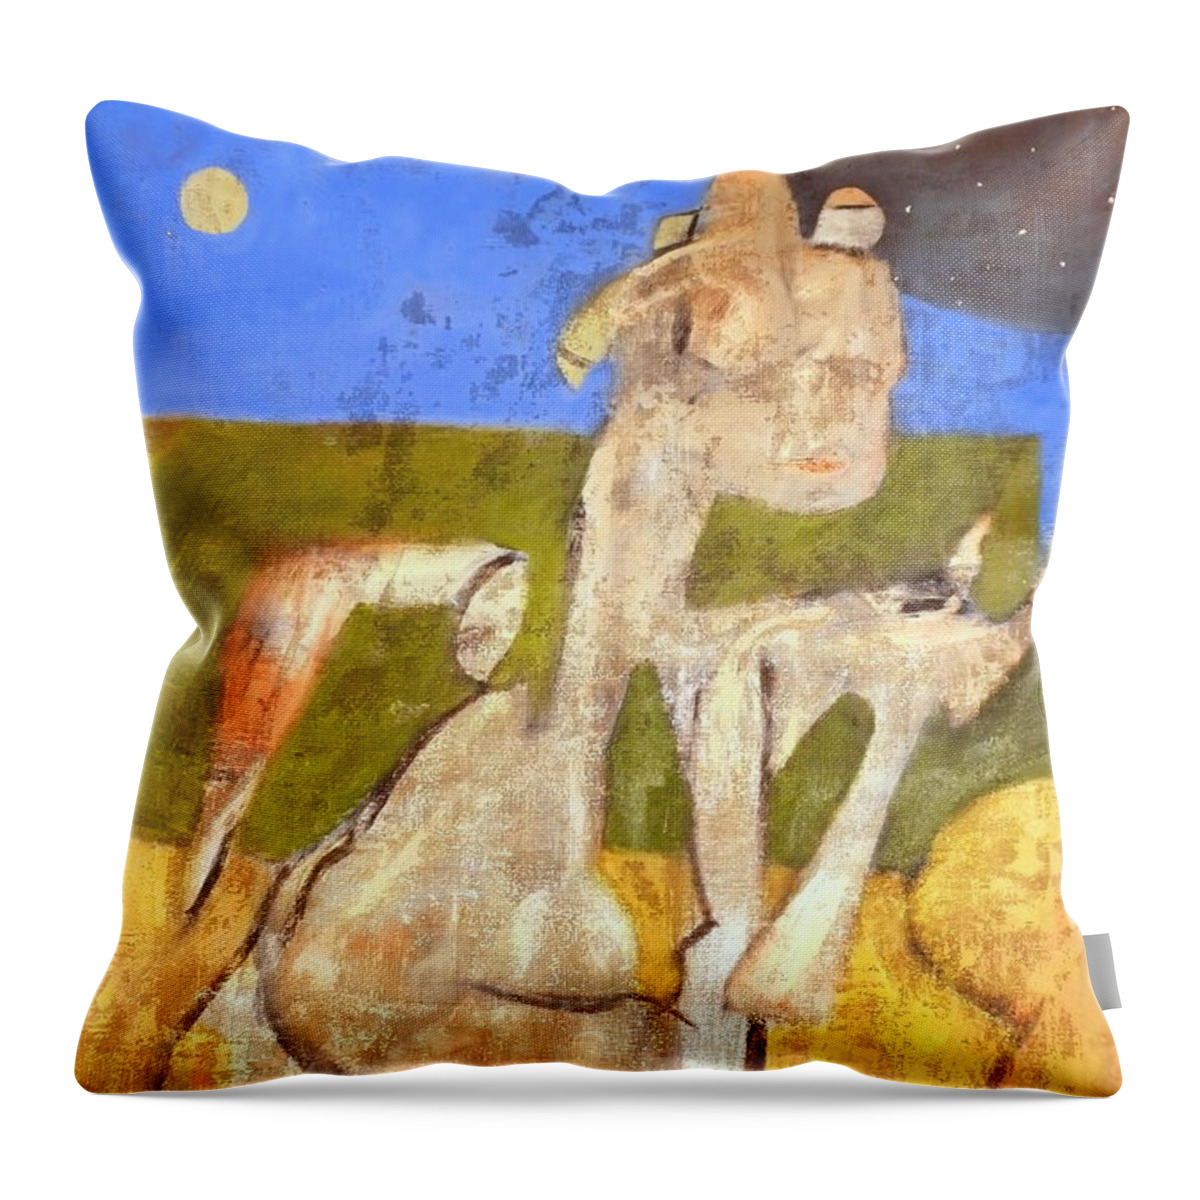 Landscape Throw Pillow featuring the painting Measuring The Movement Of Jupiter  by JC Armbruster